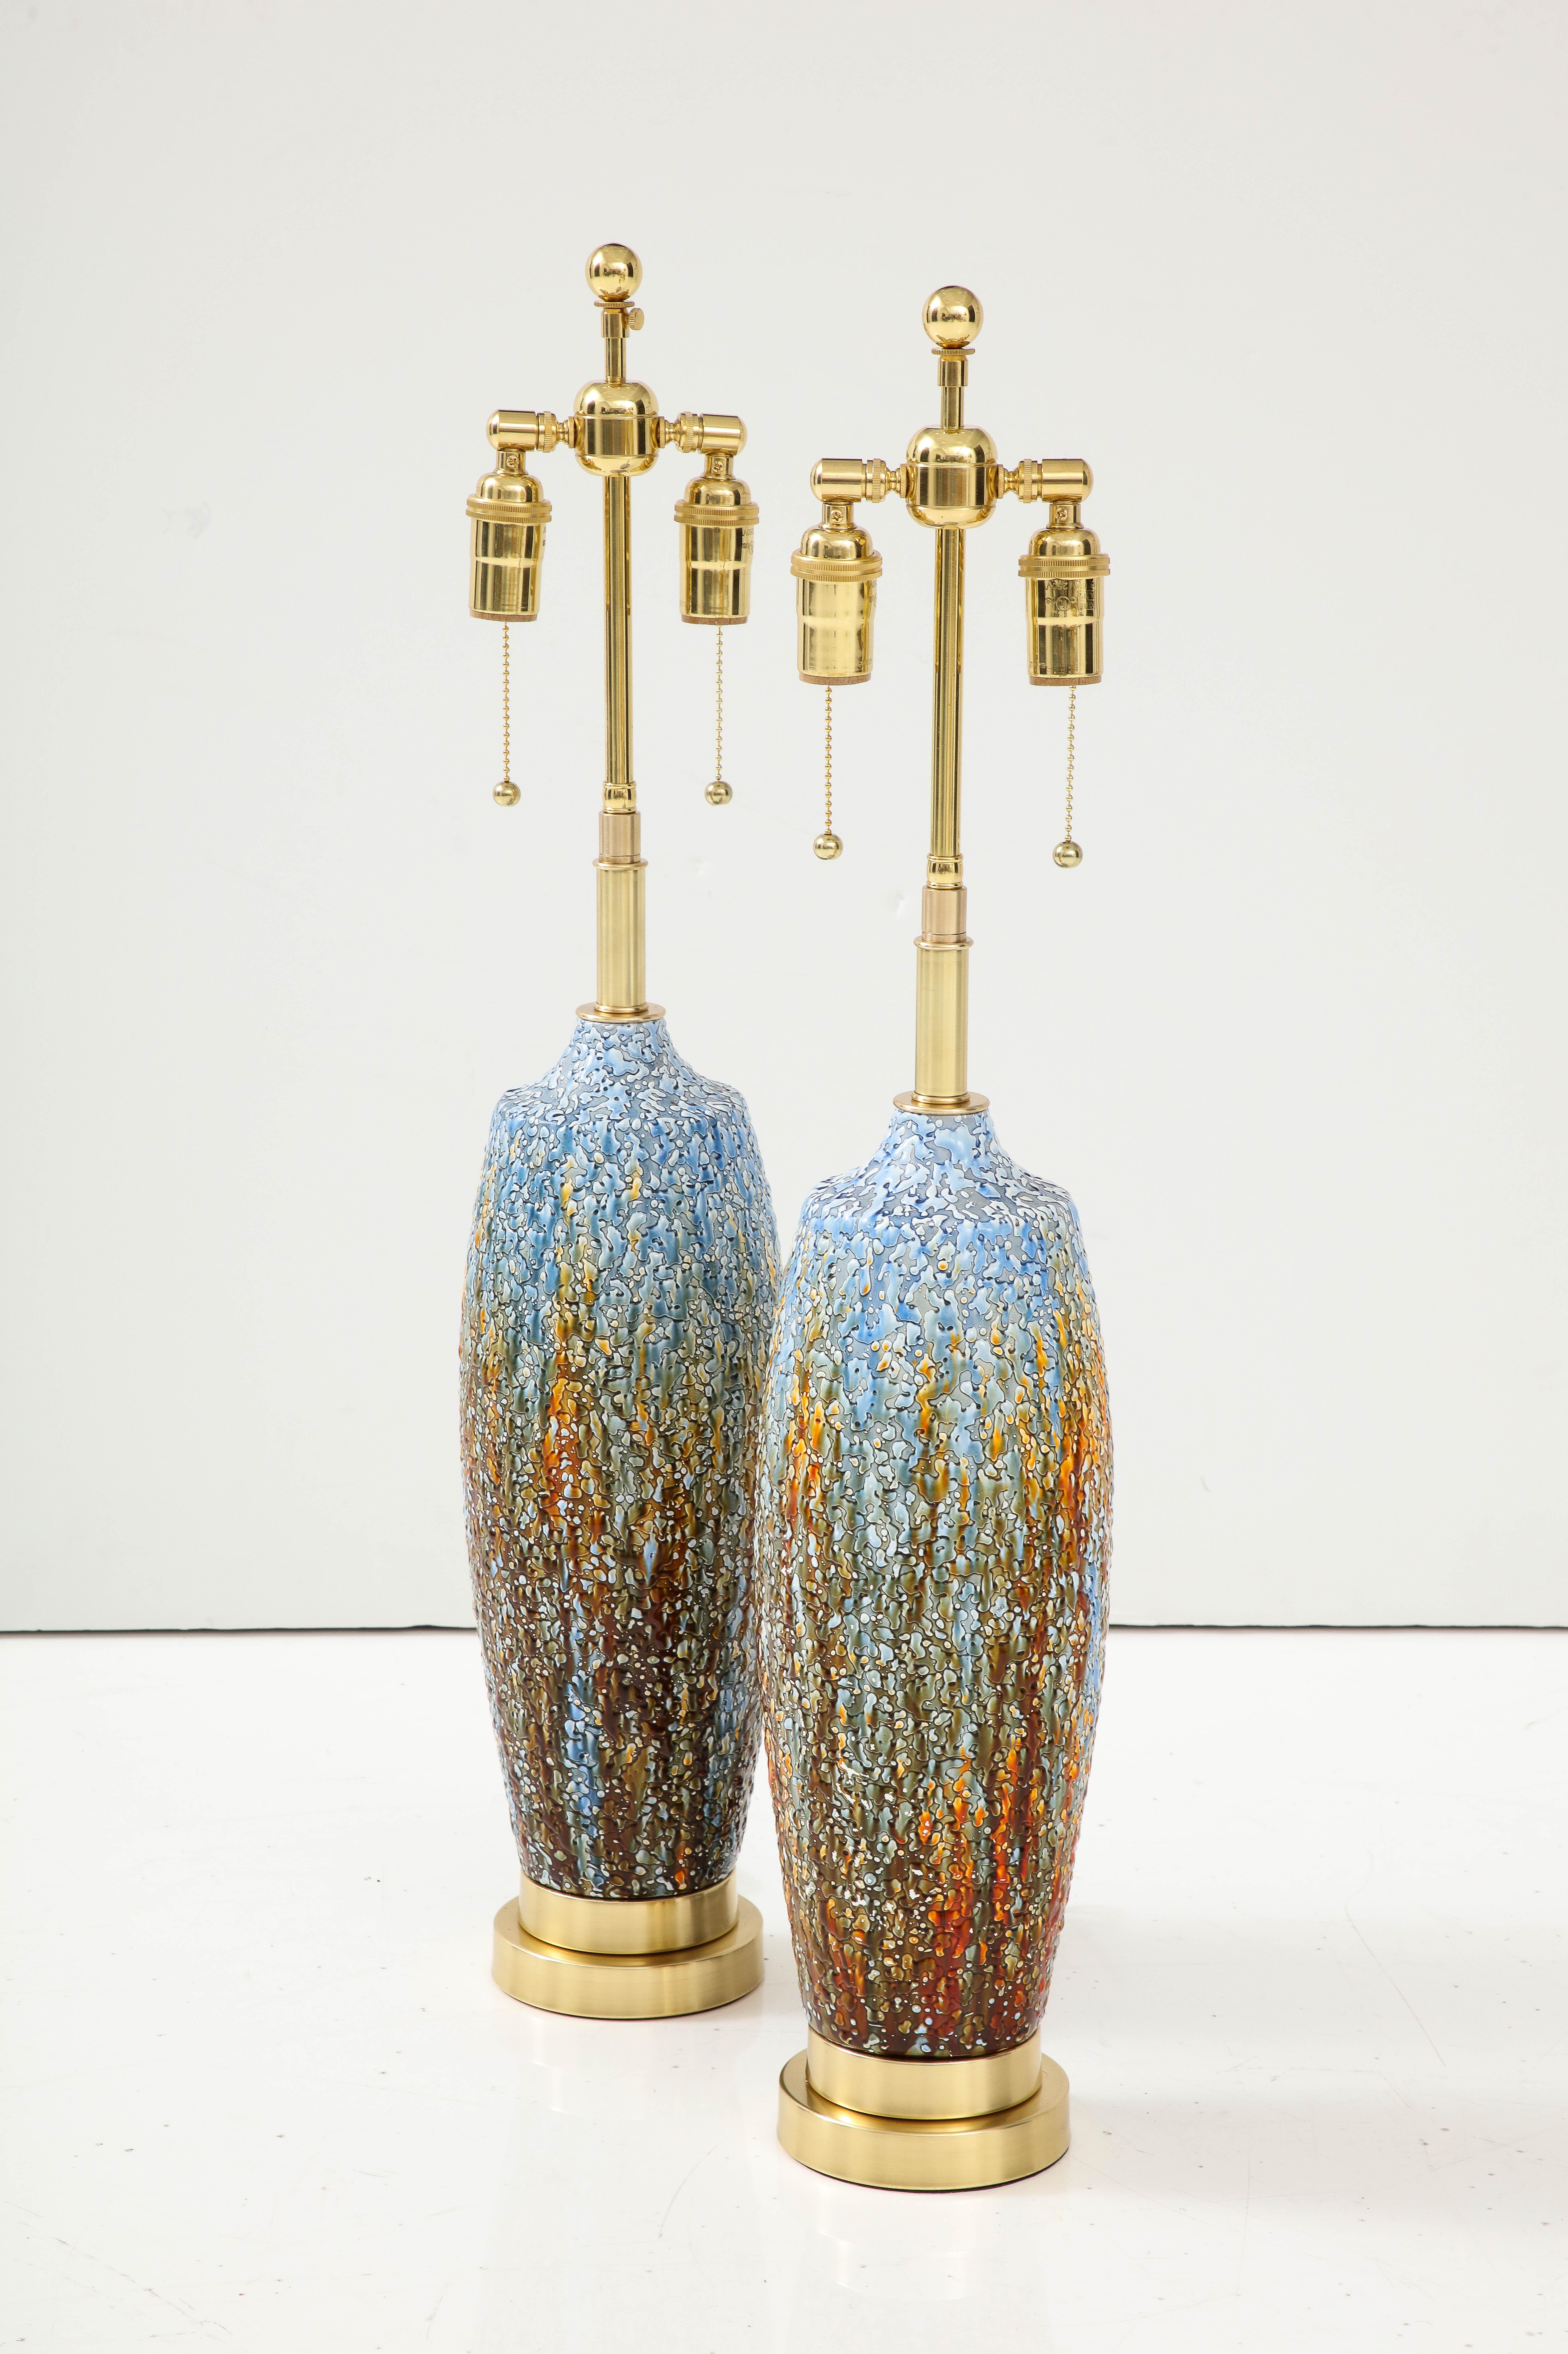 Pair of Mid-Century Modern ceramic lamps with a textured volcanic glazed finish.
The lamps have been Newly rewired with adjustable polished brass double clusters and silk rayon cords. Each socket is 60 Watts / 120 Watts per lamp.
The height to the